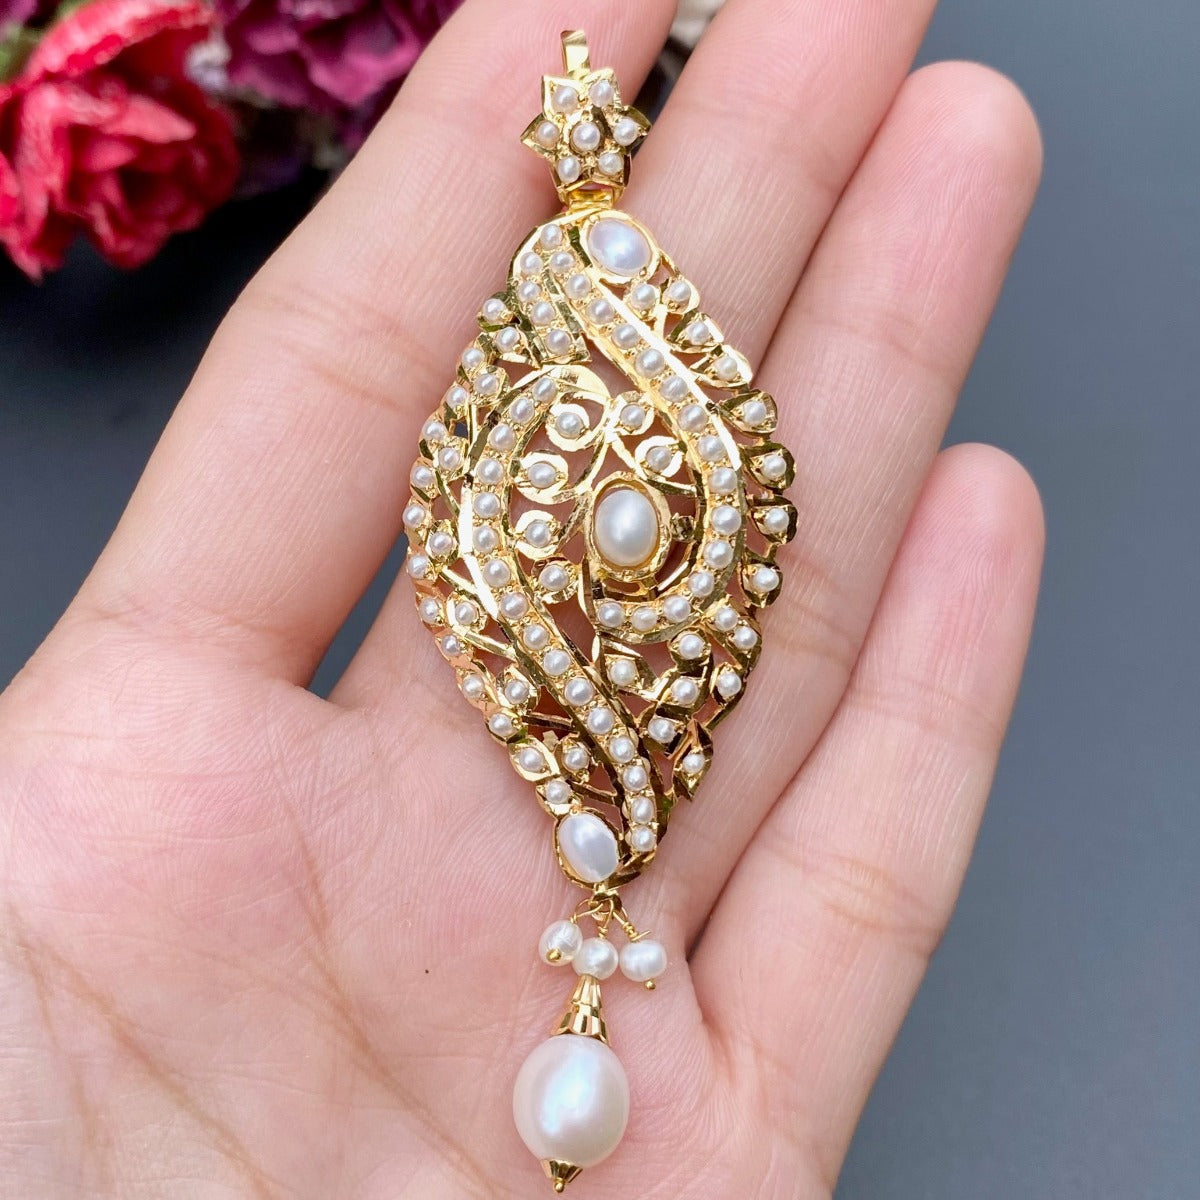 22k gold pendant studded with pearls